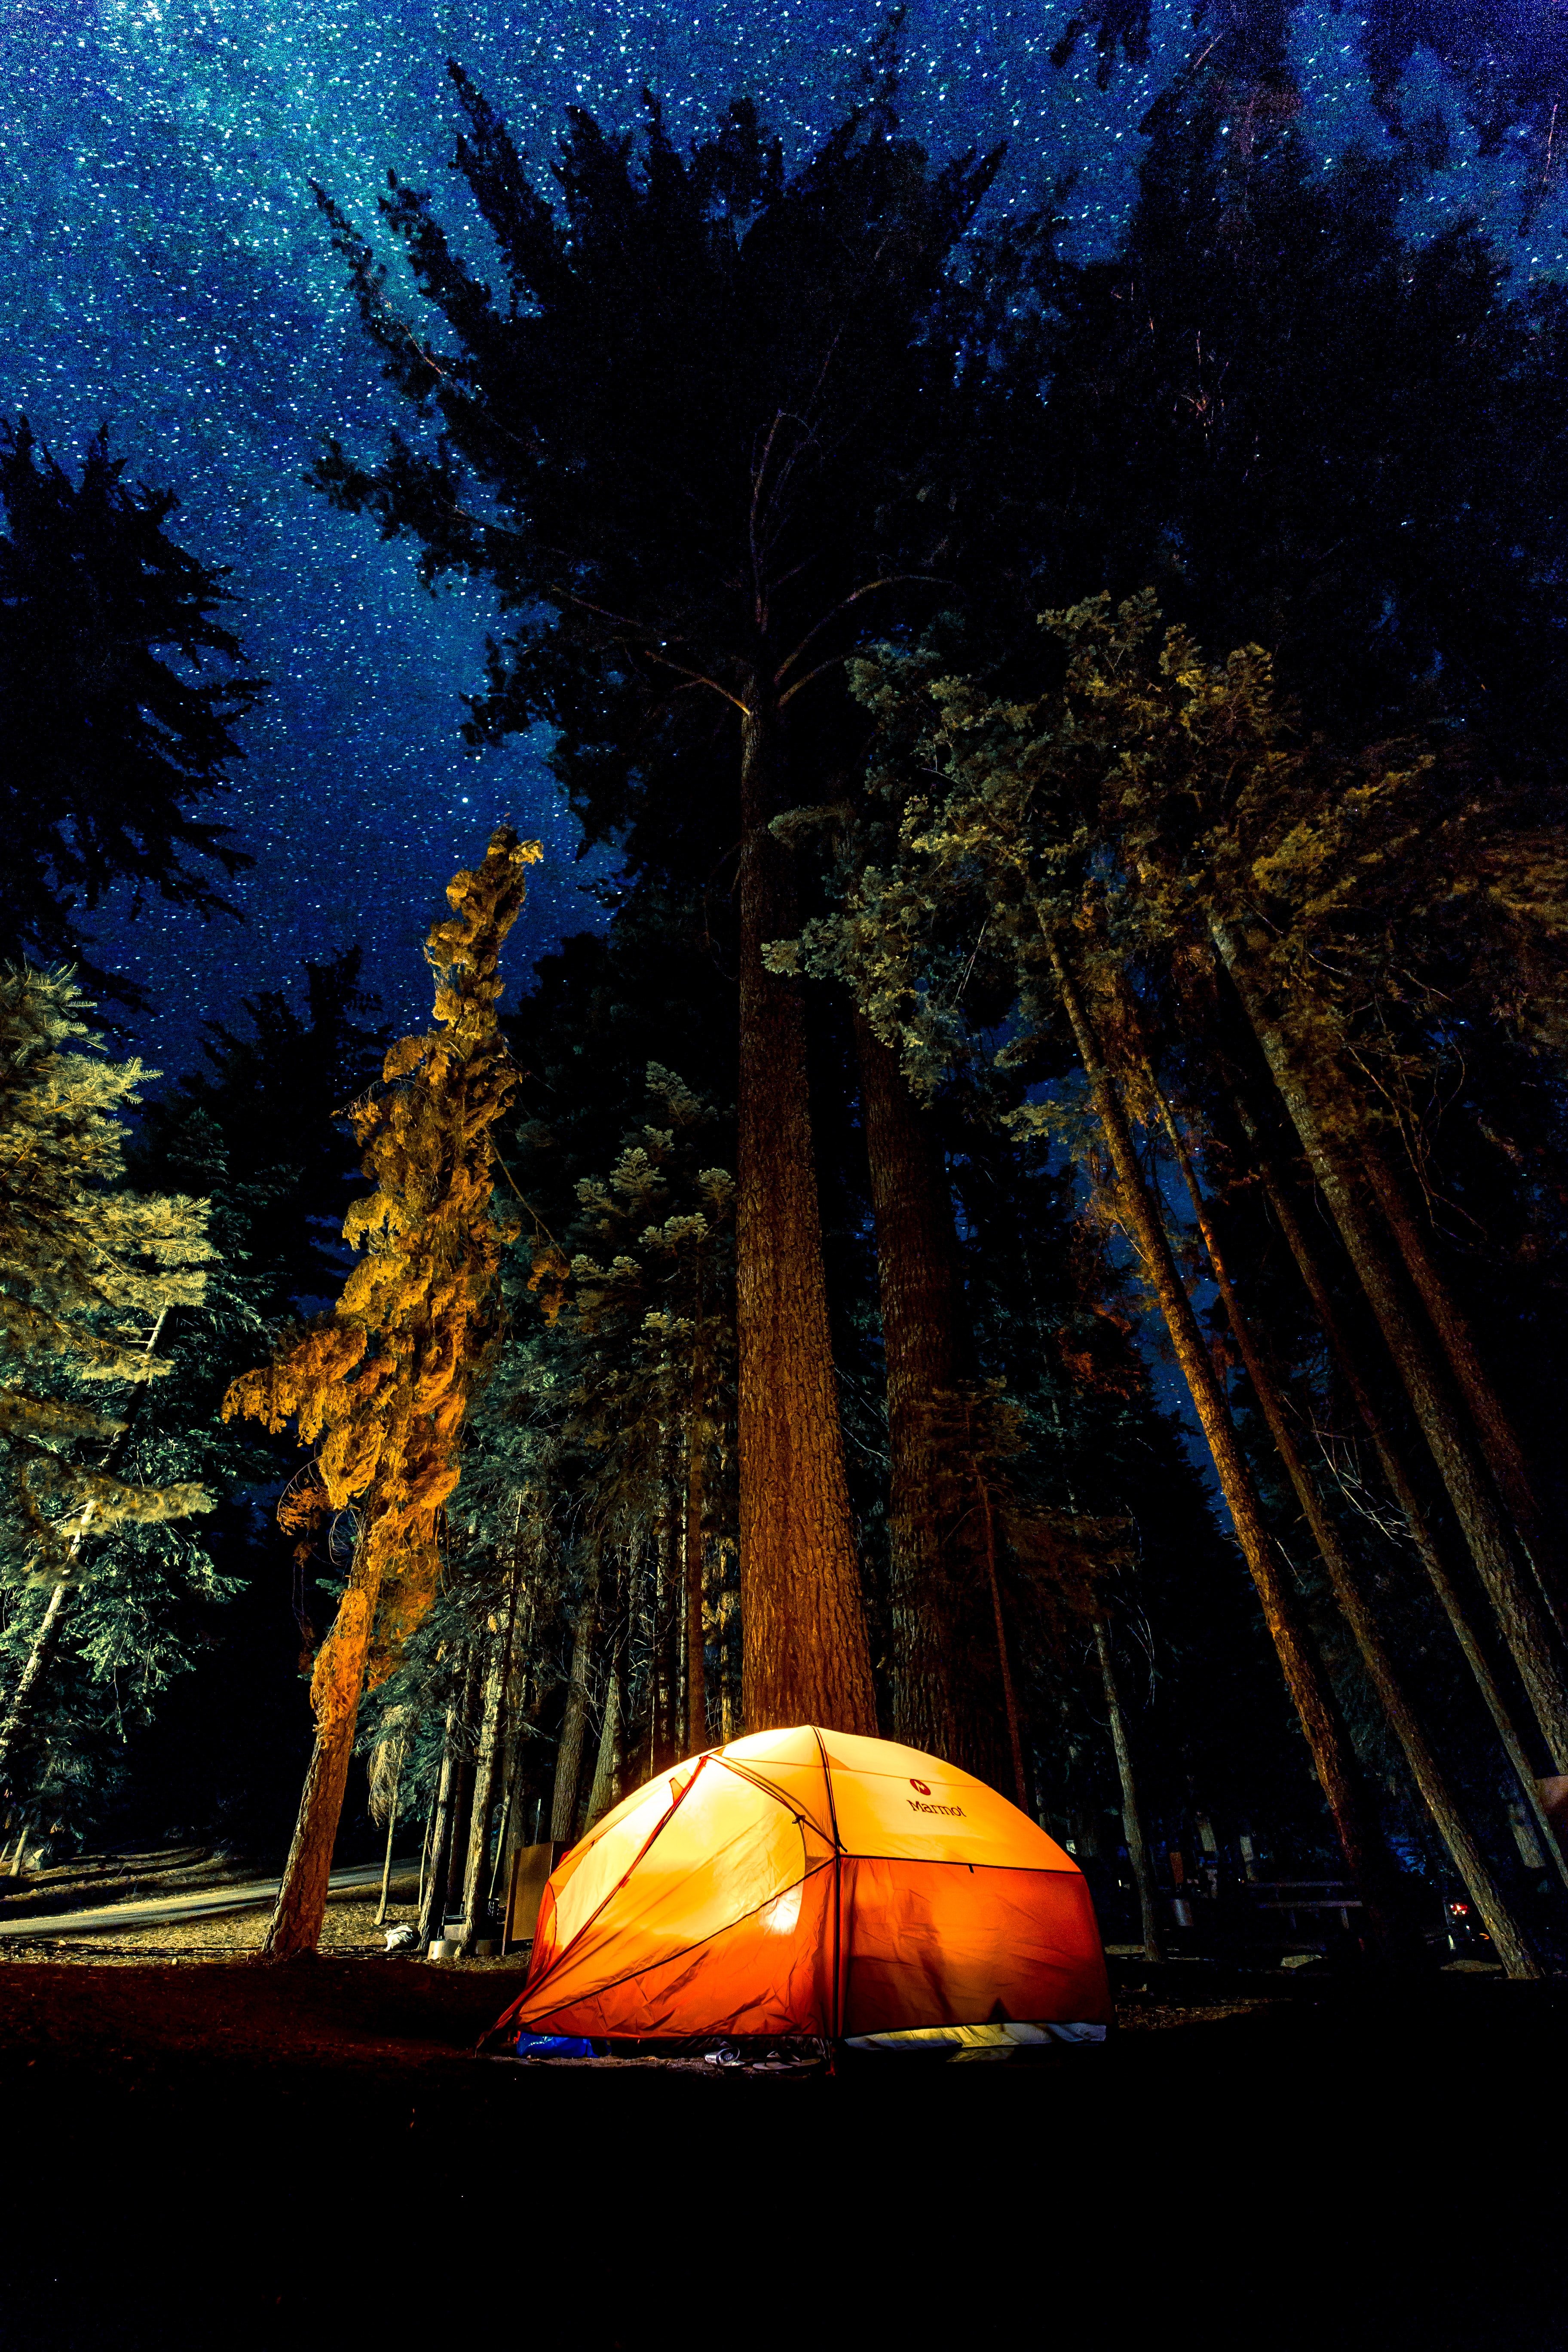 A lit tent in the forest. | Source: Unsplash